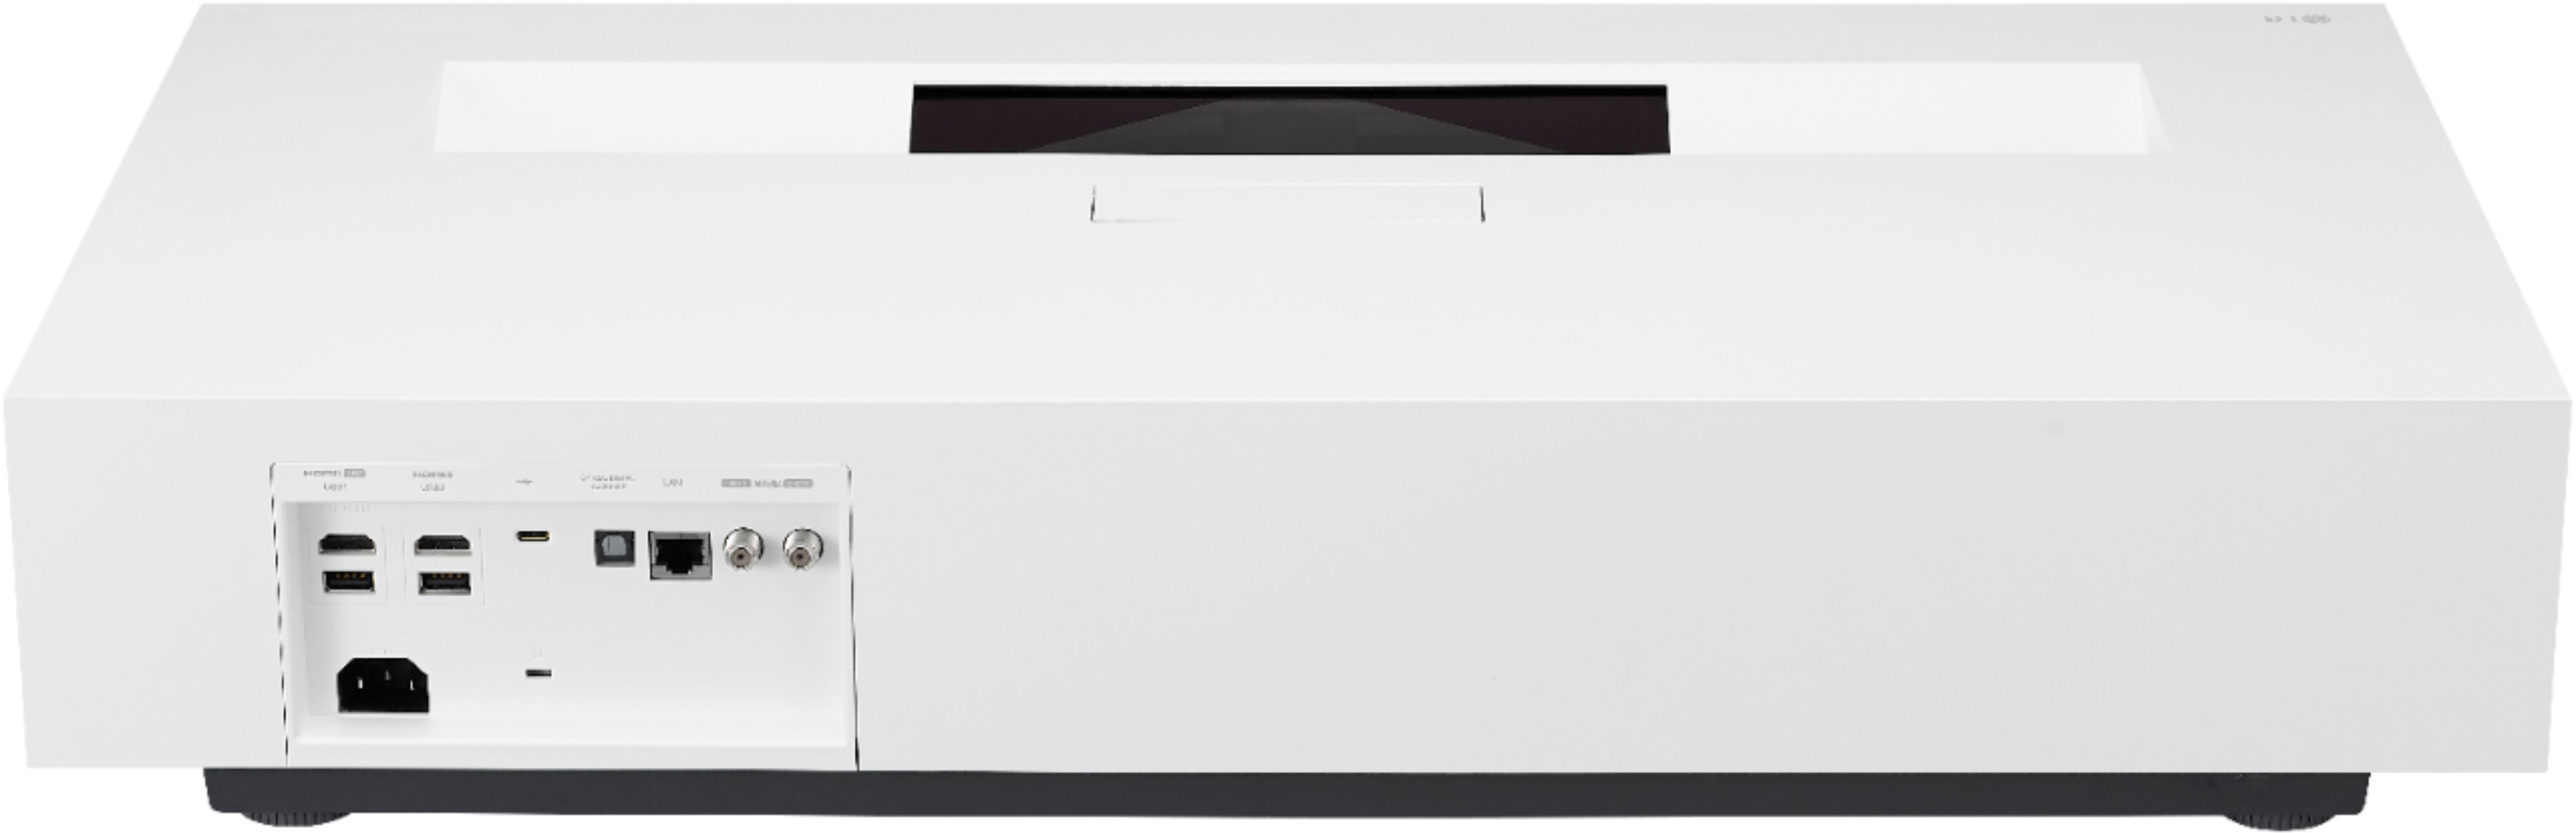 Back View: LG - 6.3 cu ft Electric Slide In Range with Air Fry and Smart Wi-Fi Enabled - Stainless steel